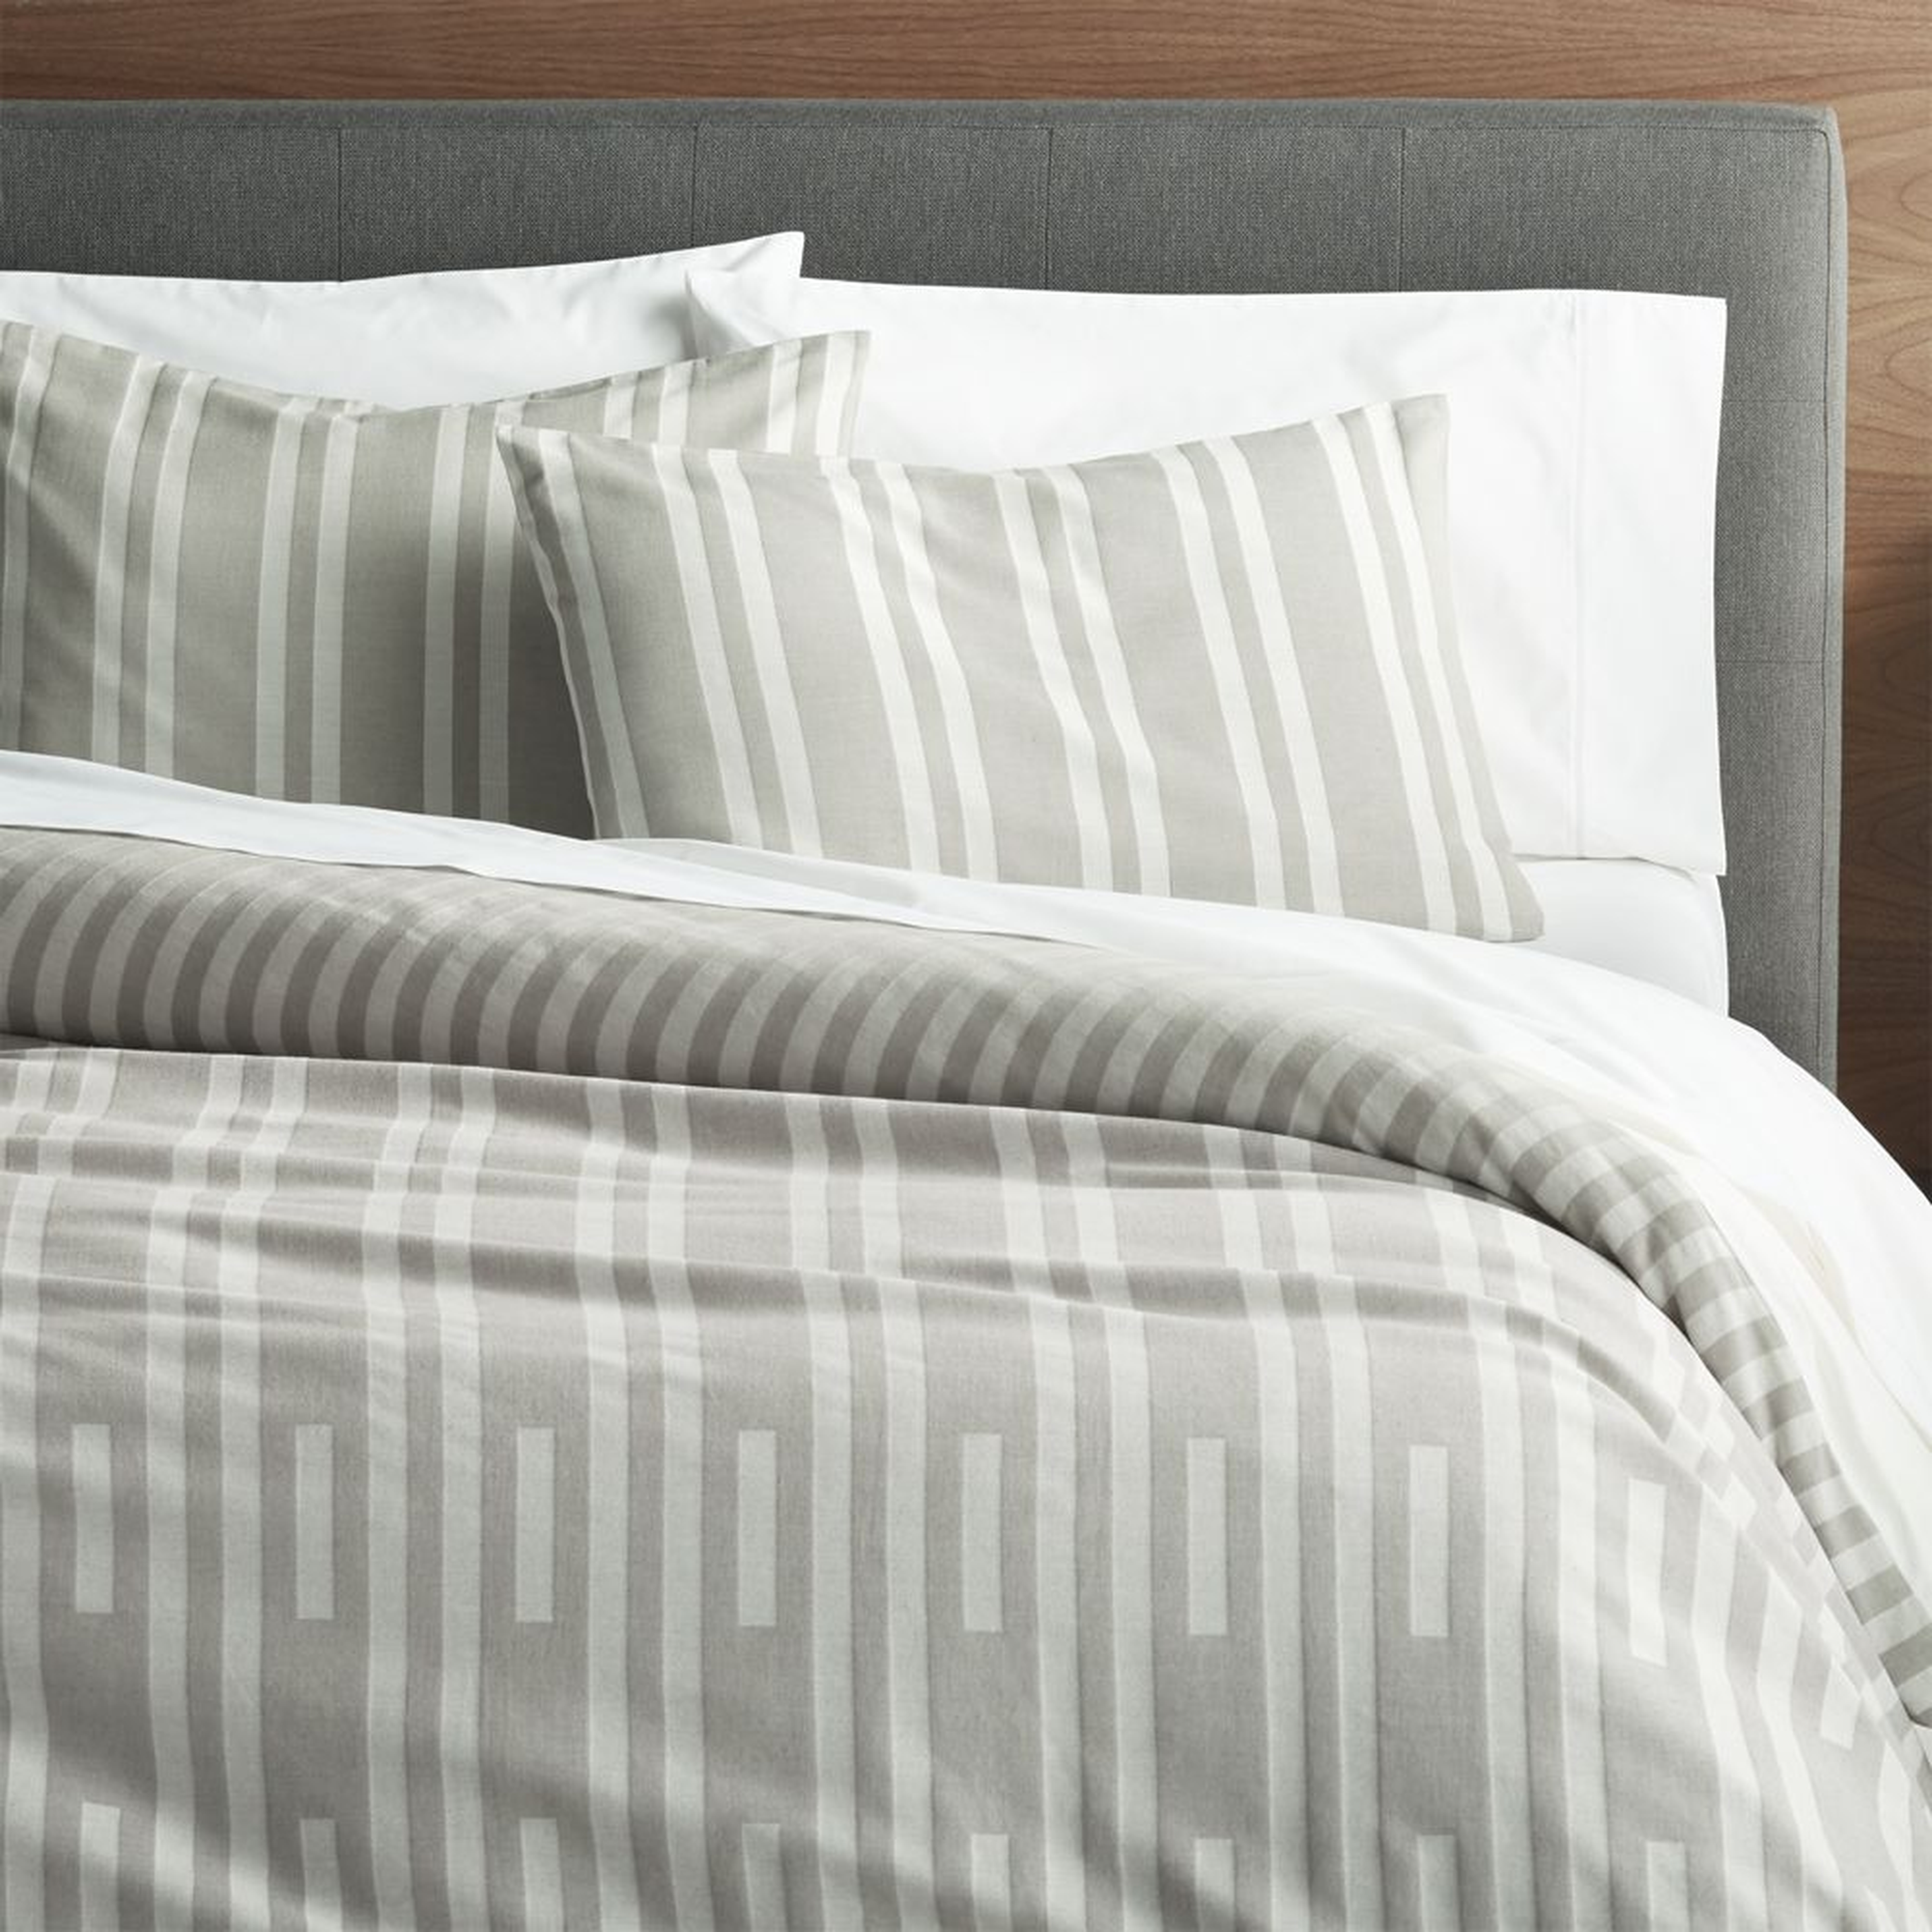 Rhesi Full/Queen Grey and White Duvet Cover - Crate and Barrel